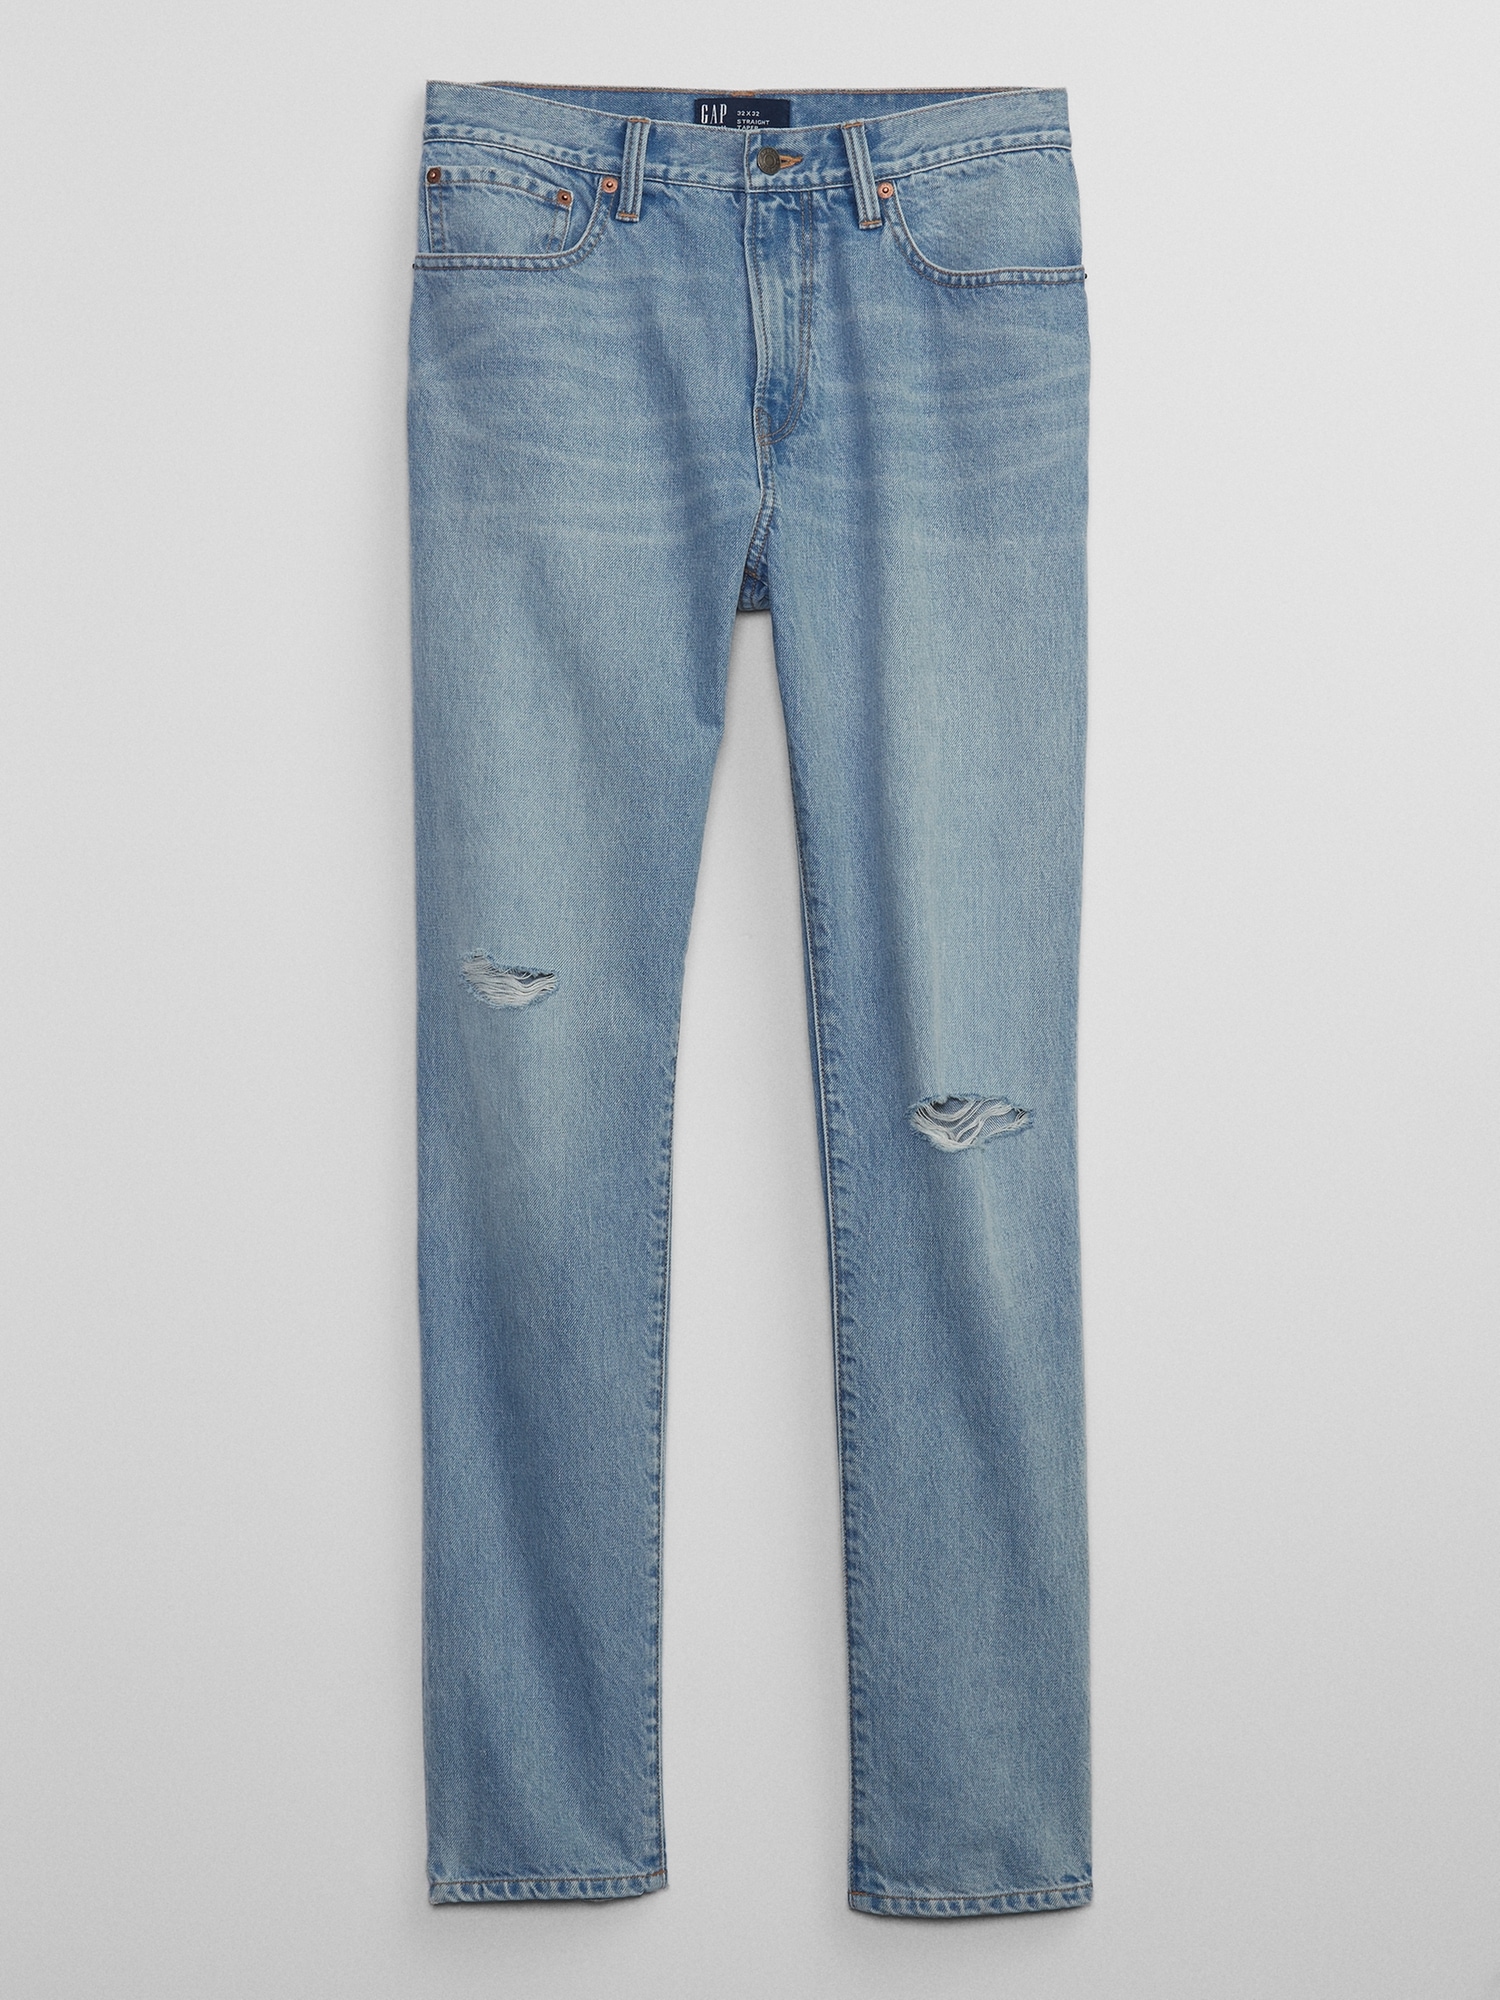 Destructed Straight Taper Jeans with Washwell | Gap Factory